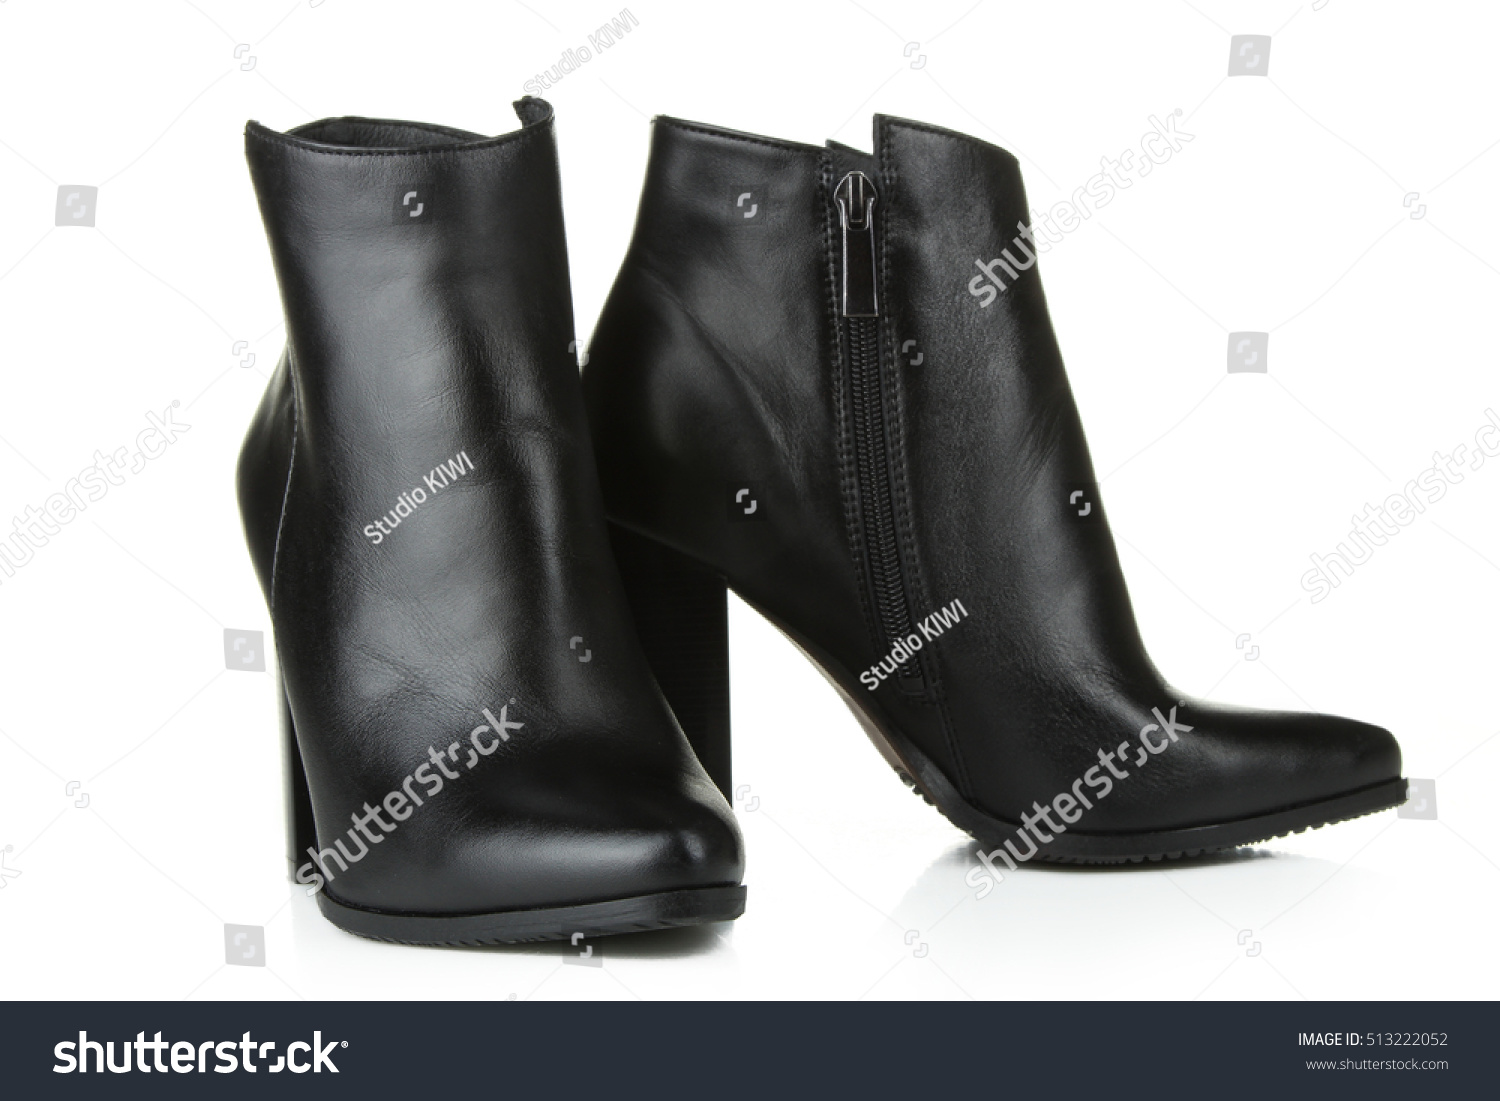 29,577 Shorts boots Images, Stock Photos & Vectors | Shutterstock